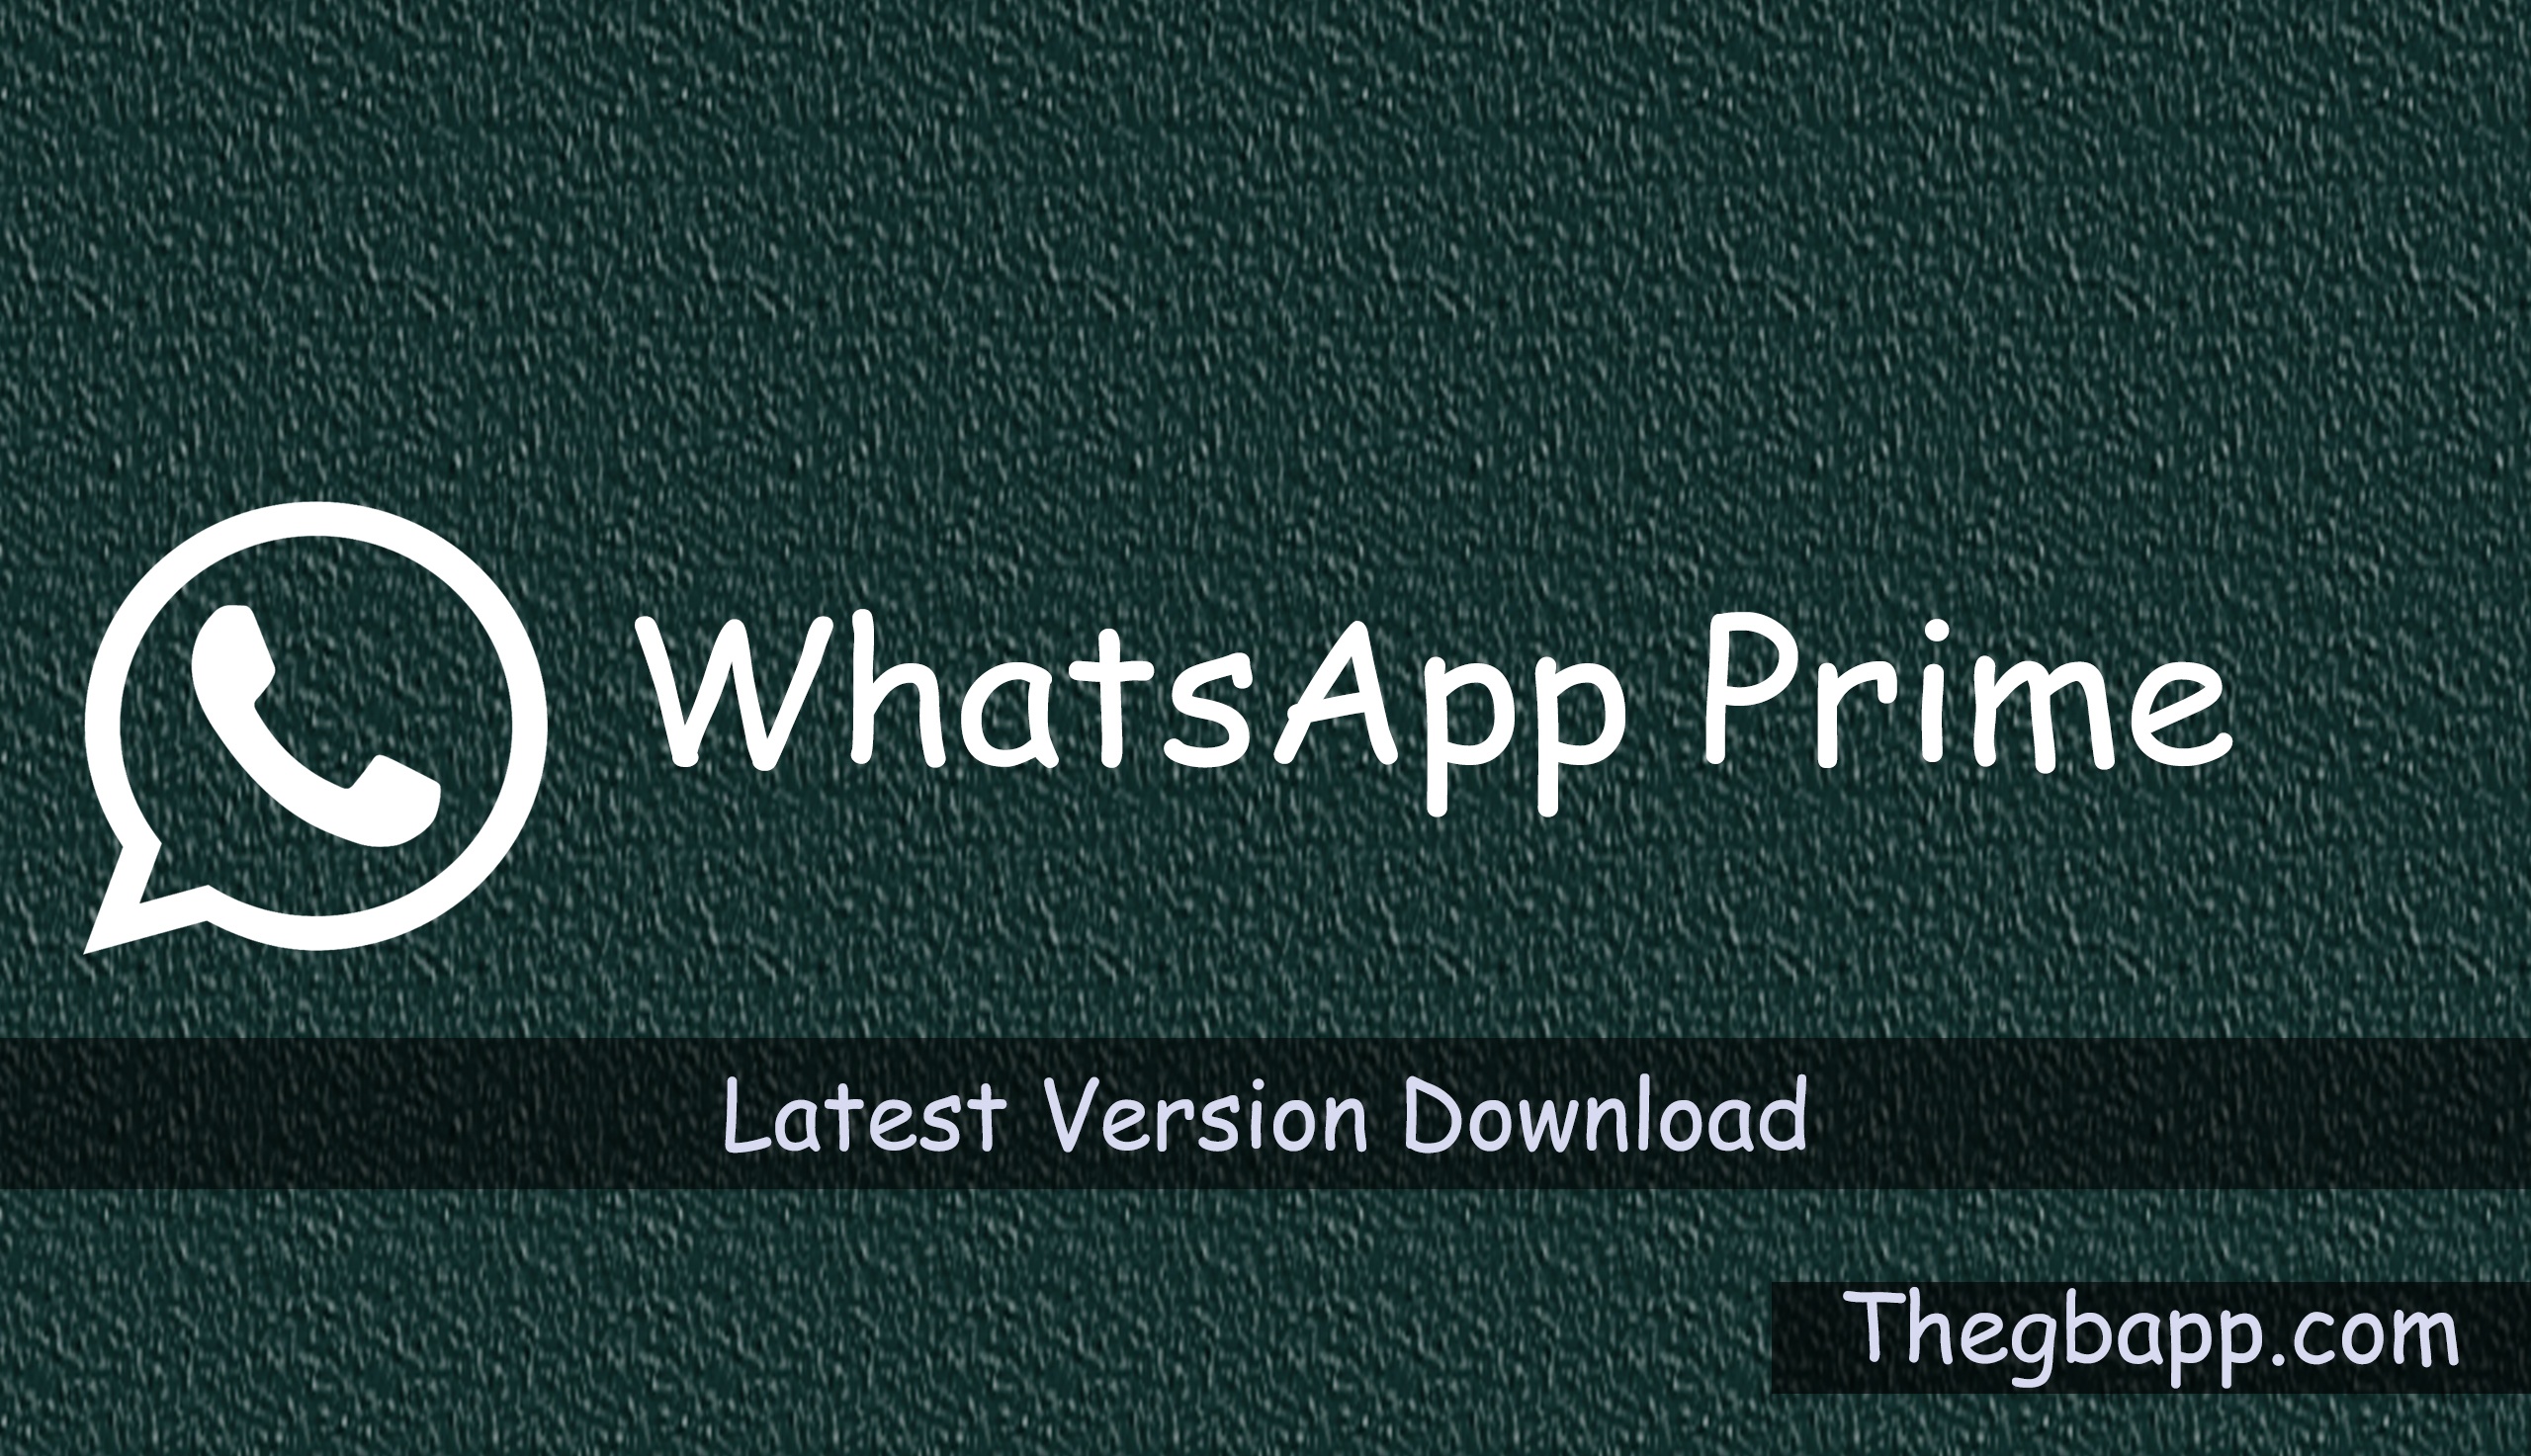 WhatsApp Prime 1.2.10 Latest Version Download - TheGBApps